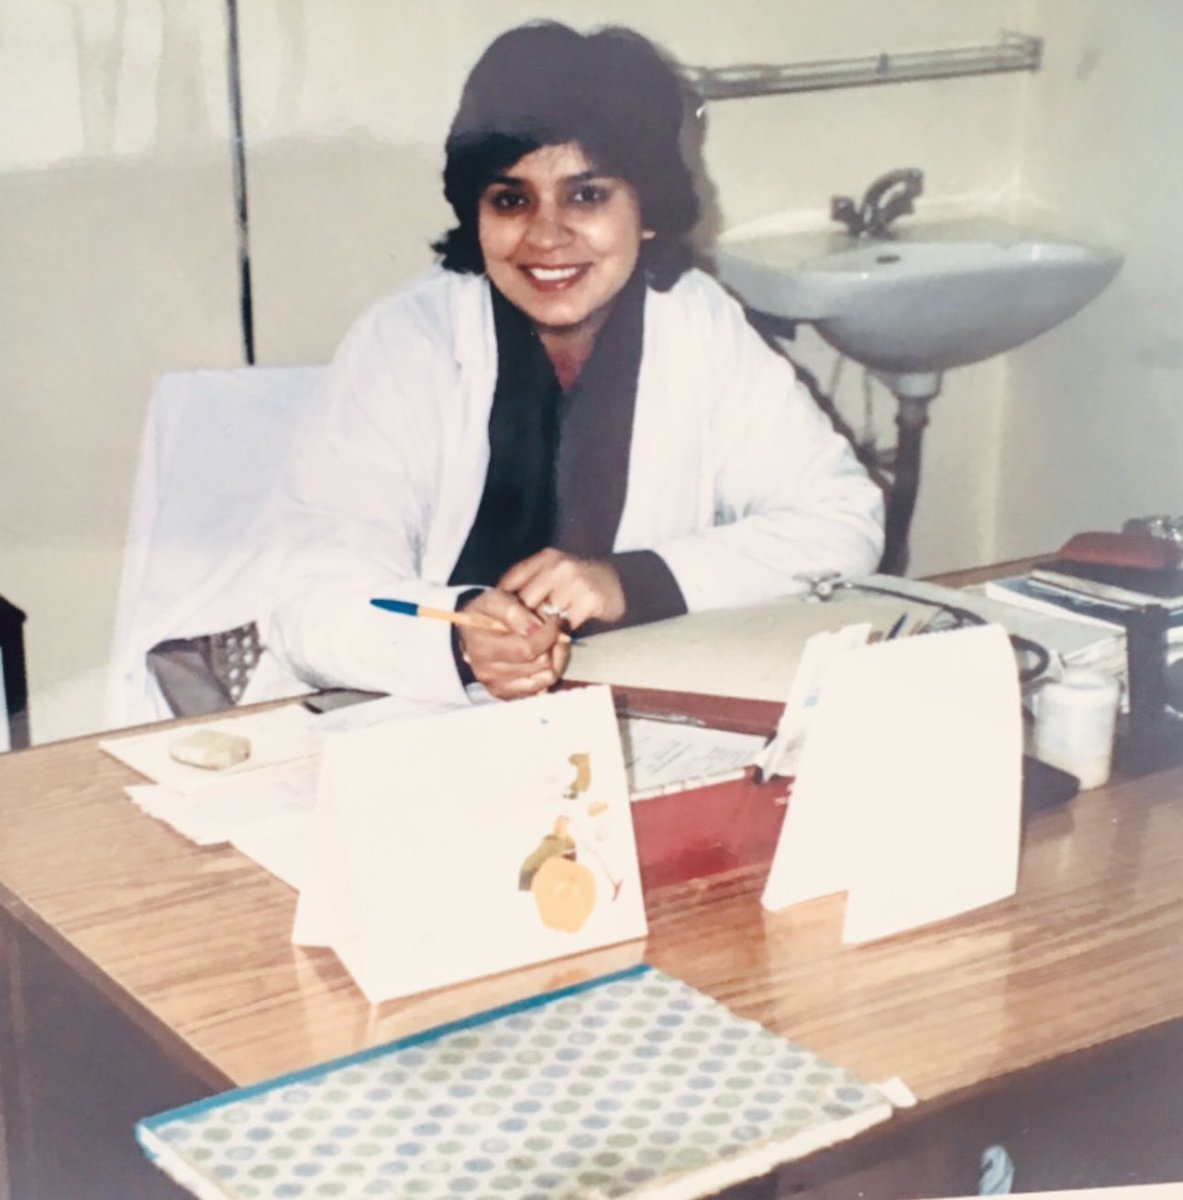 This #CountHerIn & #InvestInWomen theme for #IWD2024 hits close to home. At 14 yo I lost my inspiring Mom👇🏼, a clinician/researcher, which fuelled my passion for science. When we invest in women, we invest in a brighter future for all! #CountHerIn ‍✨#notjusttoday